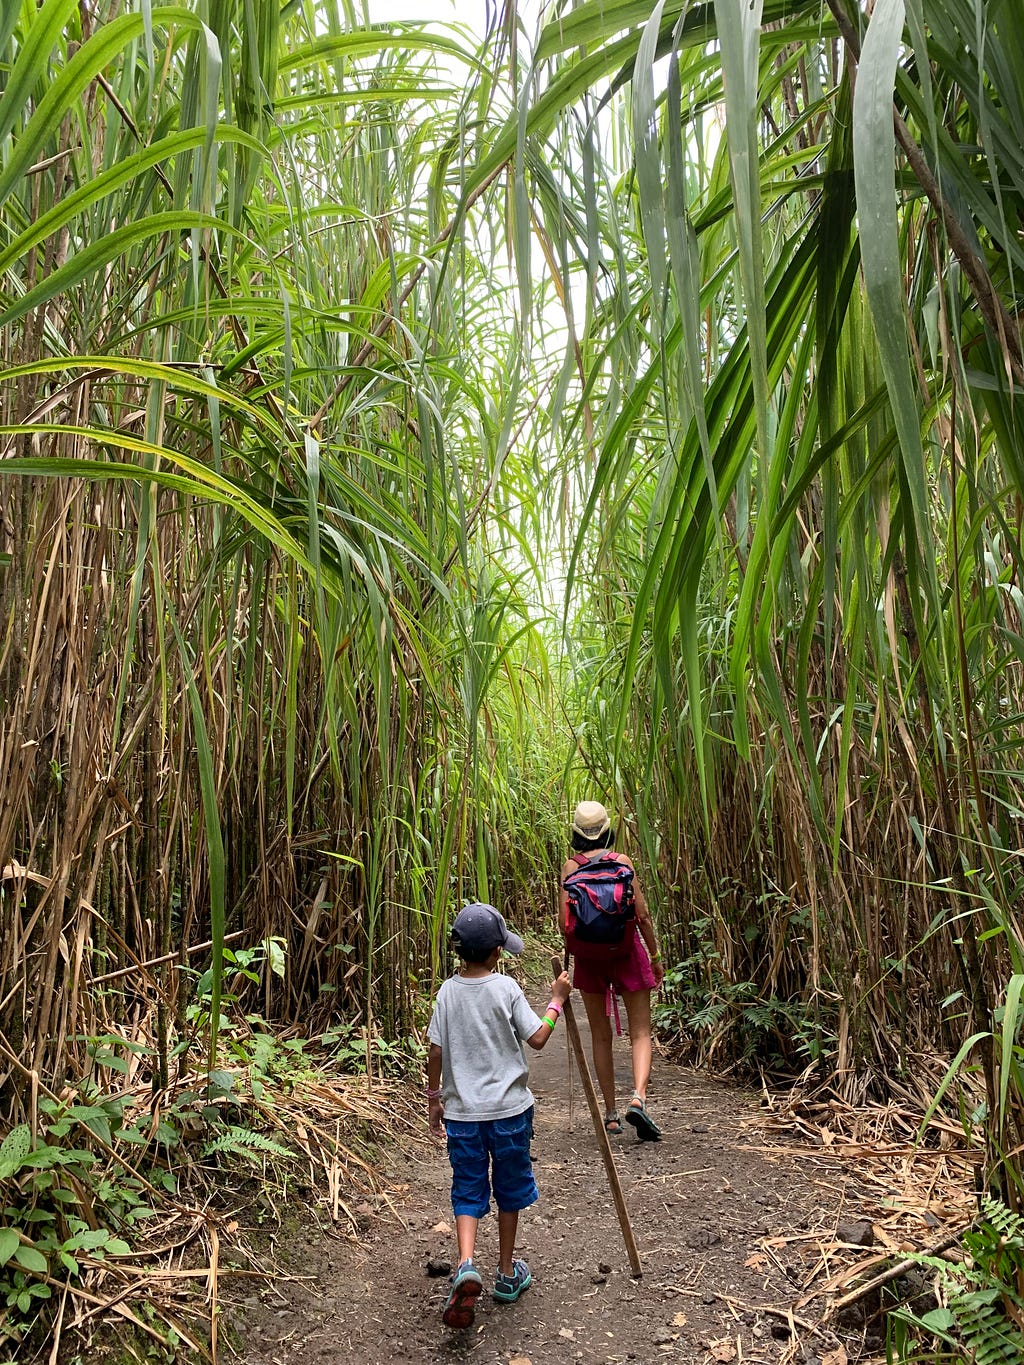 A boy and his mother hiking through a narrow pathway of tall bamboo